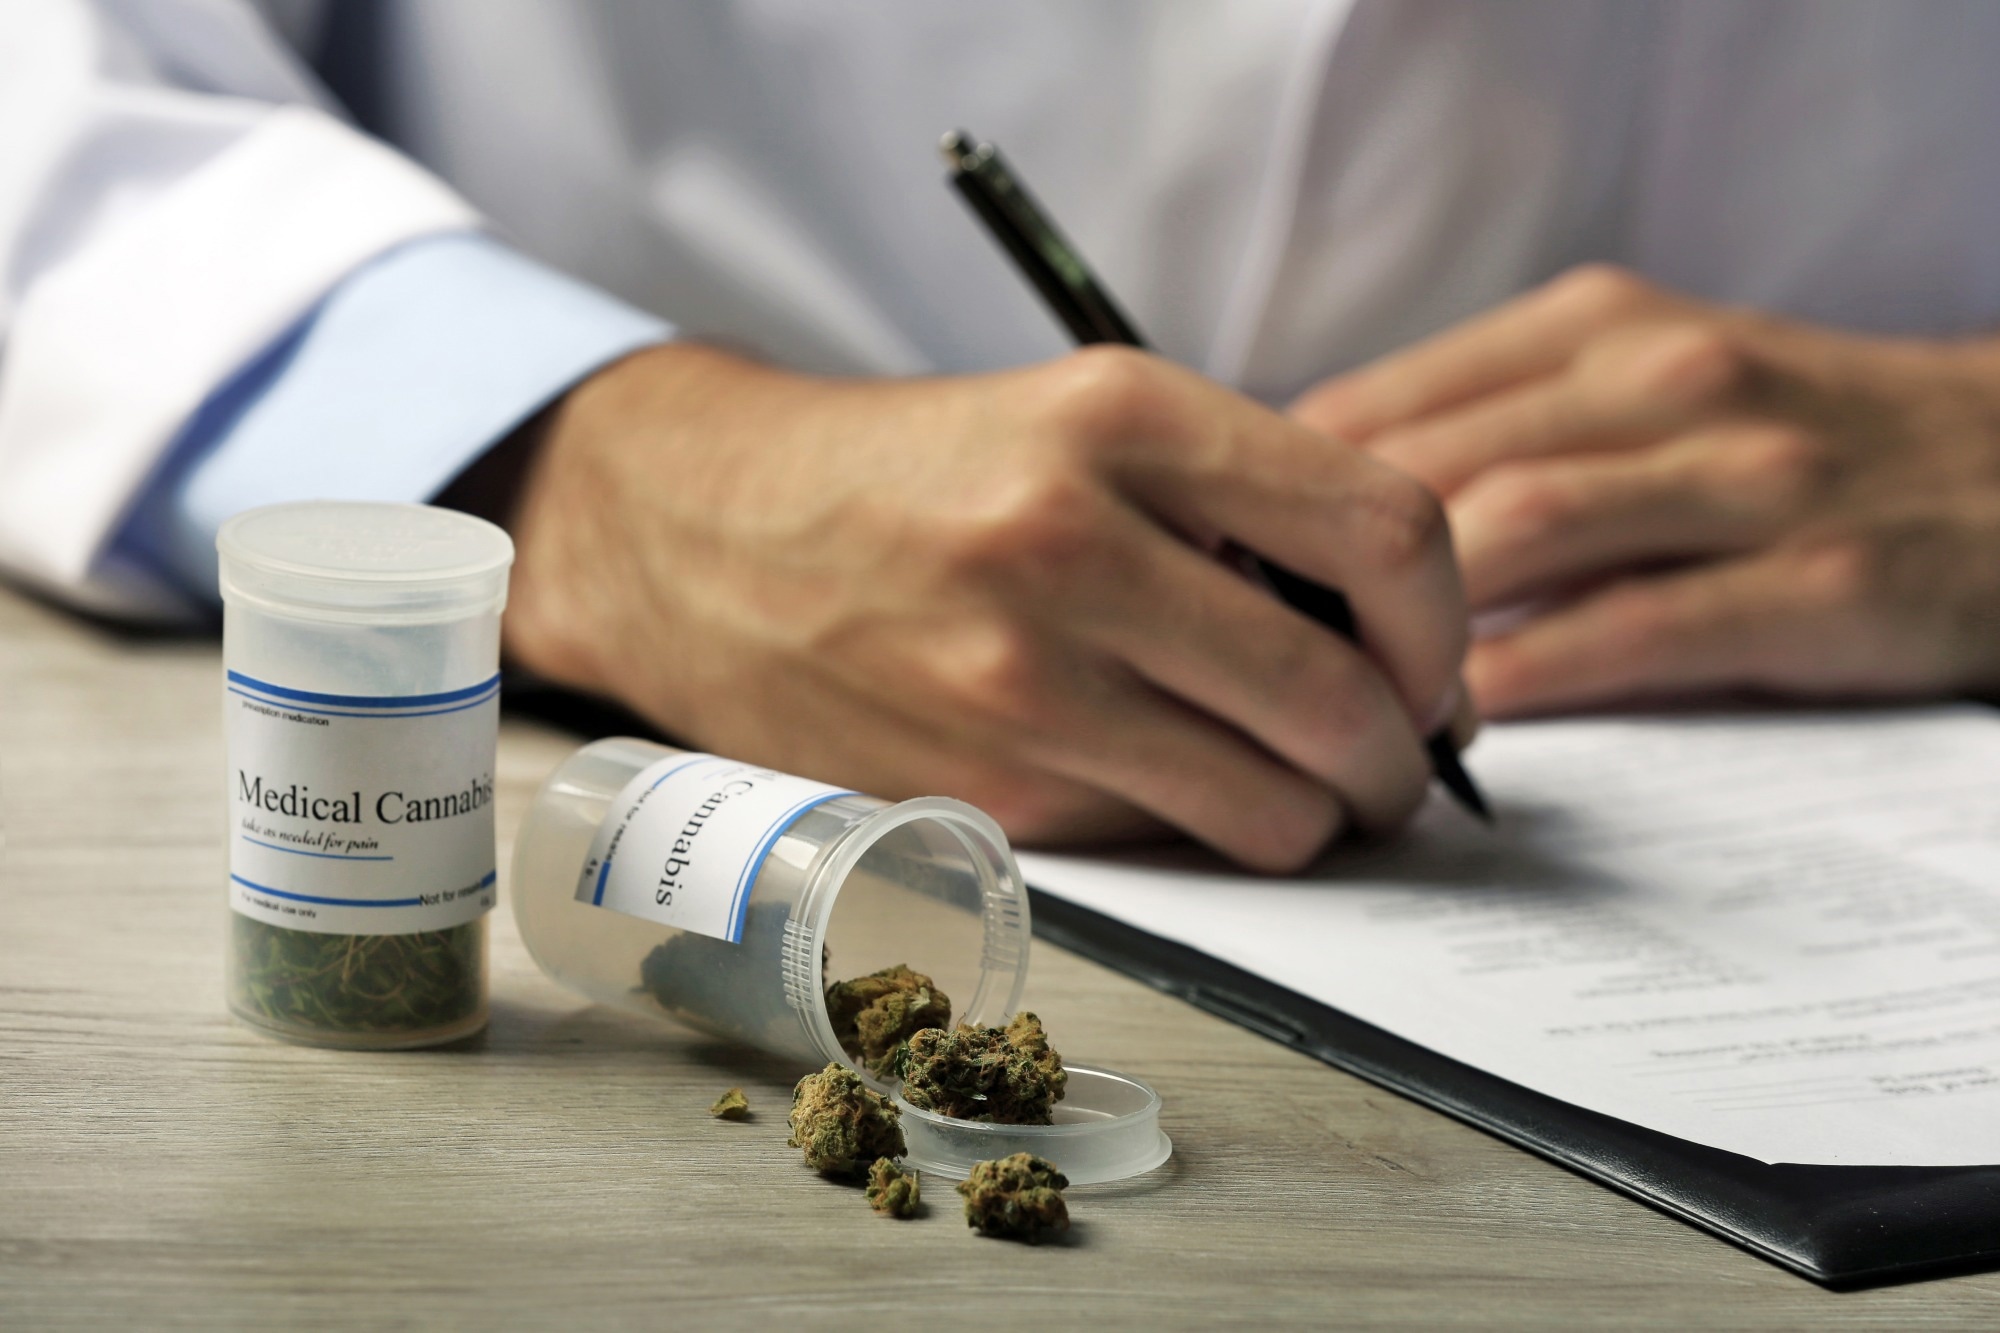 Study: Assessment of Medical Cannabis and Health-Related Quality of Life. Image Credit: AfricaStudio/Shutterstock.com